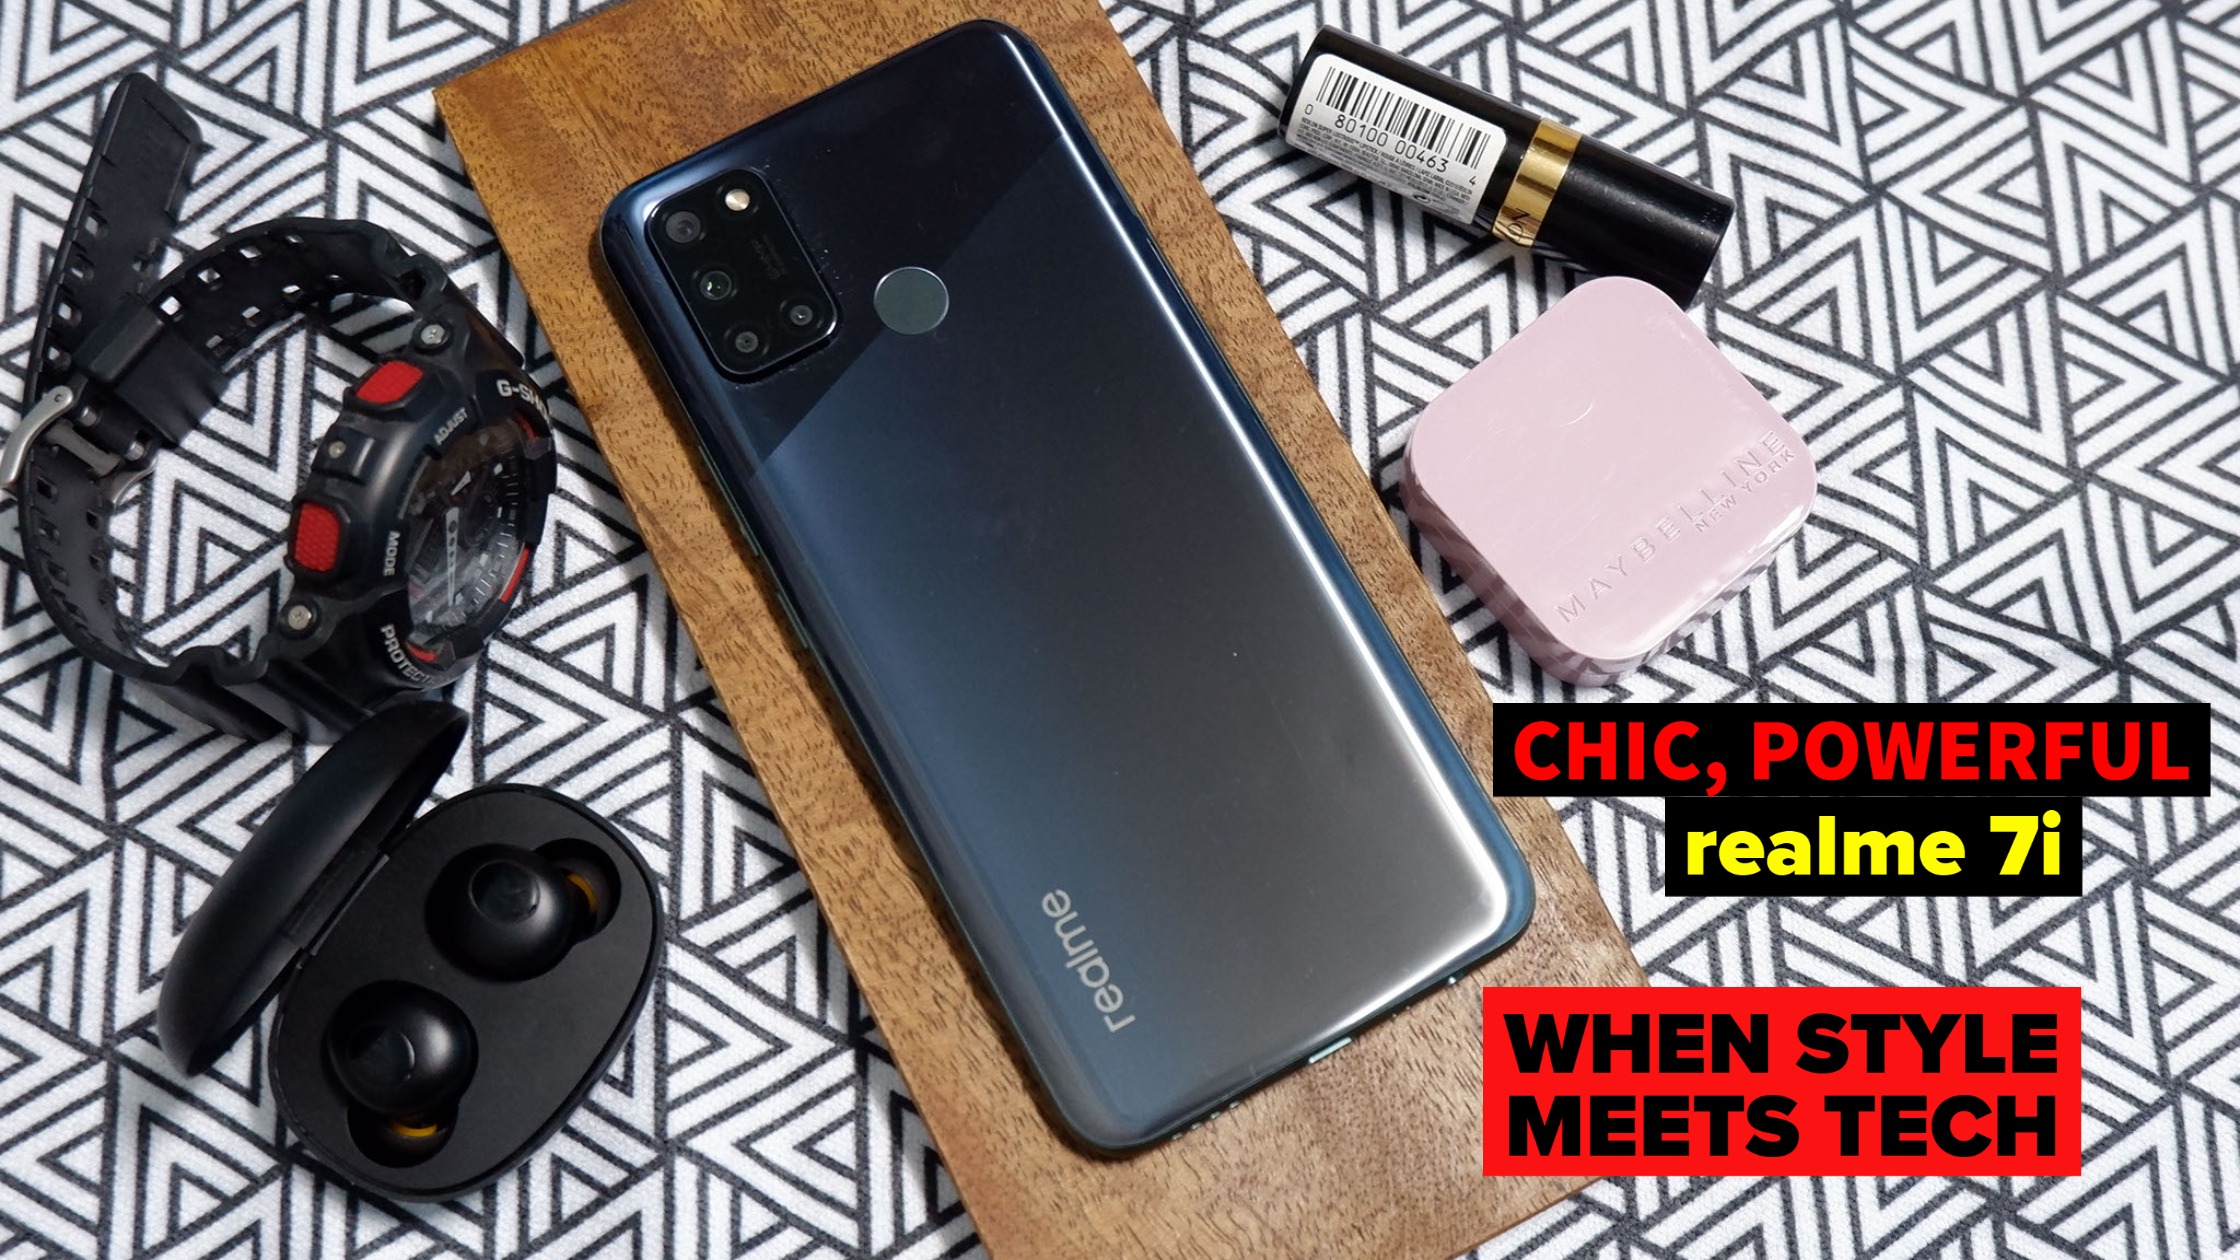 Chic, powerful realme 7i: When style meets tech